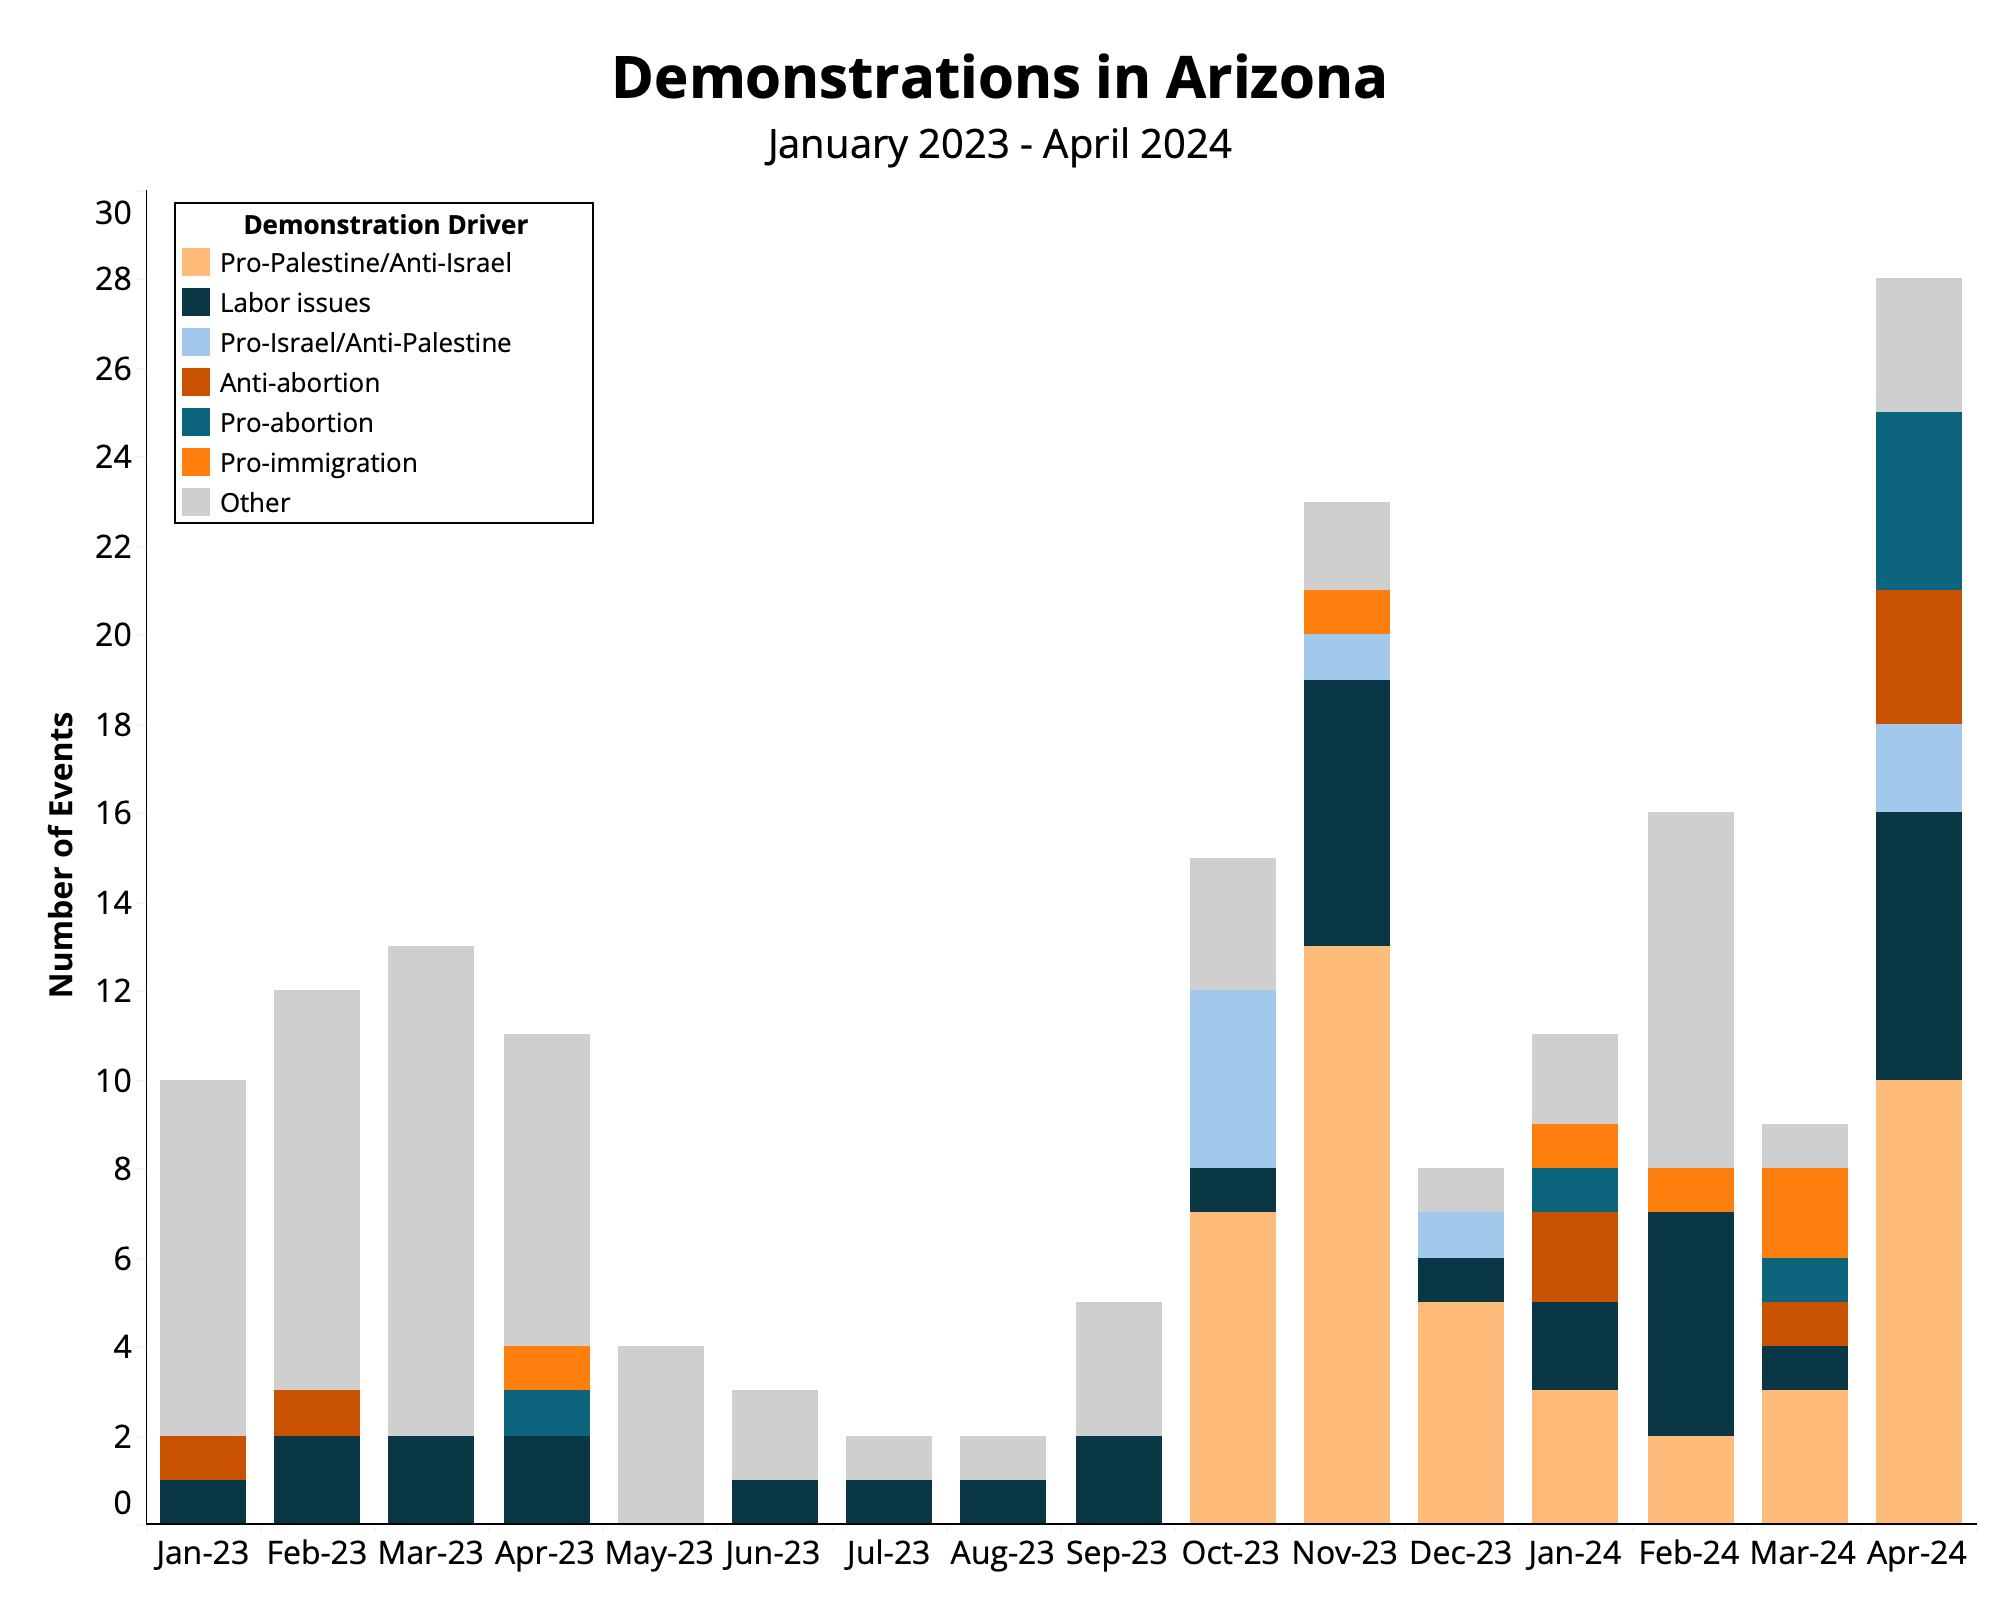 Bar chart - Election Watch - Demonstrations in Arizona January 2023 to April 2024